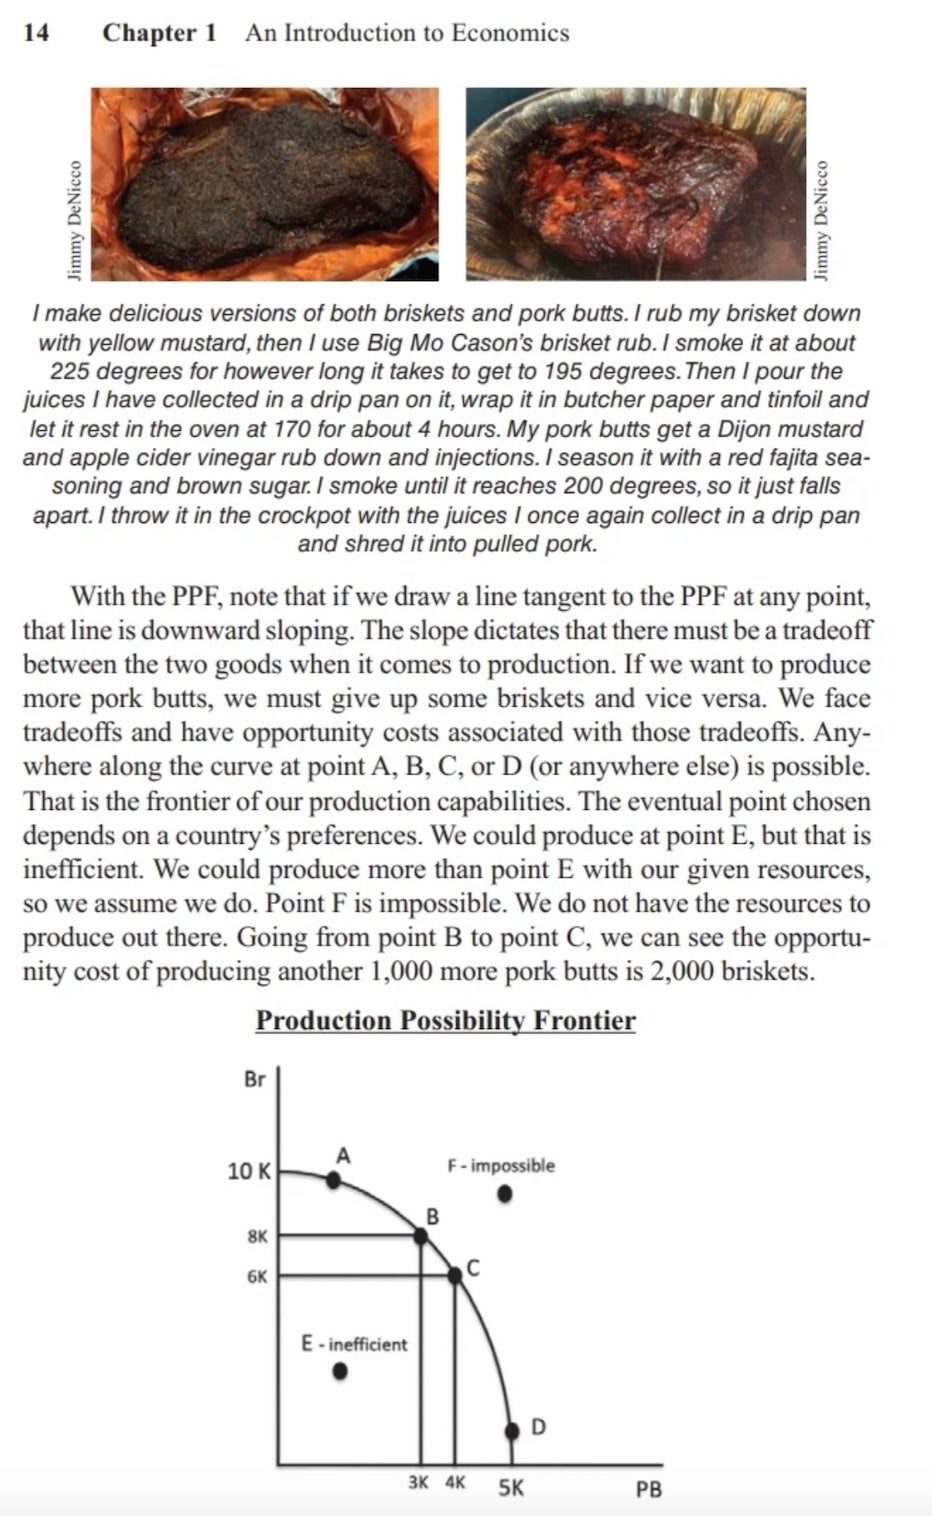 Page from "A Story of Economics: A Principles Tale"